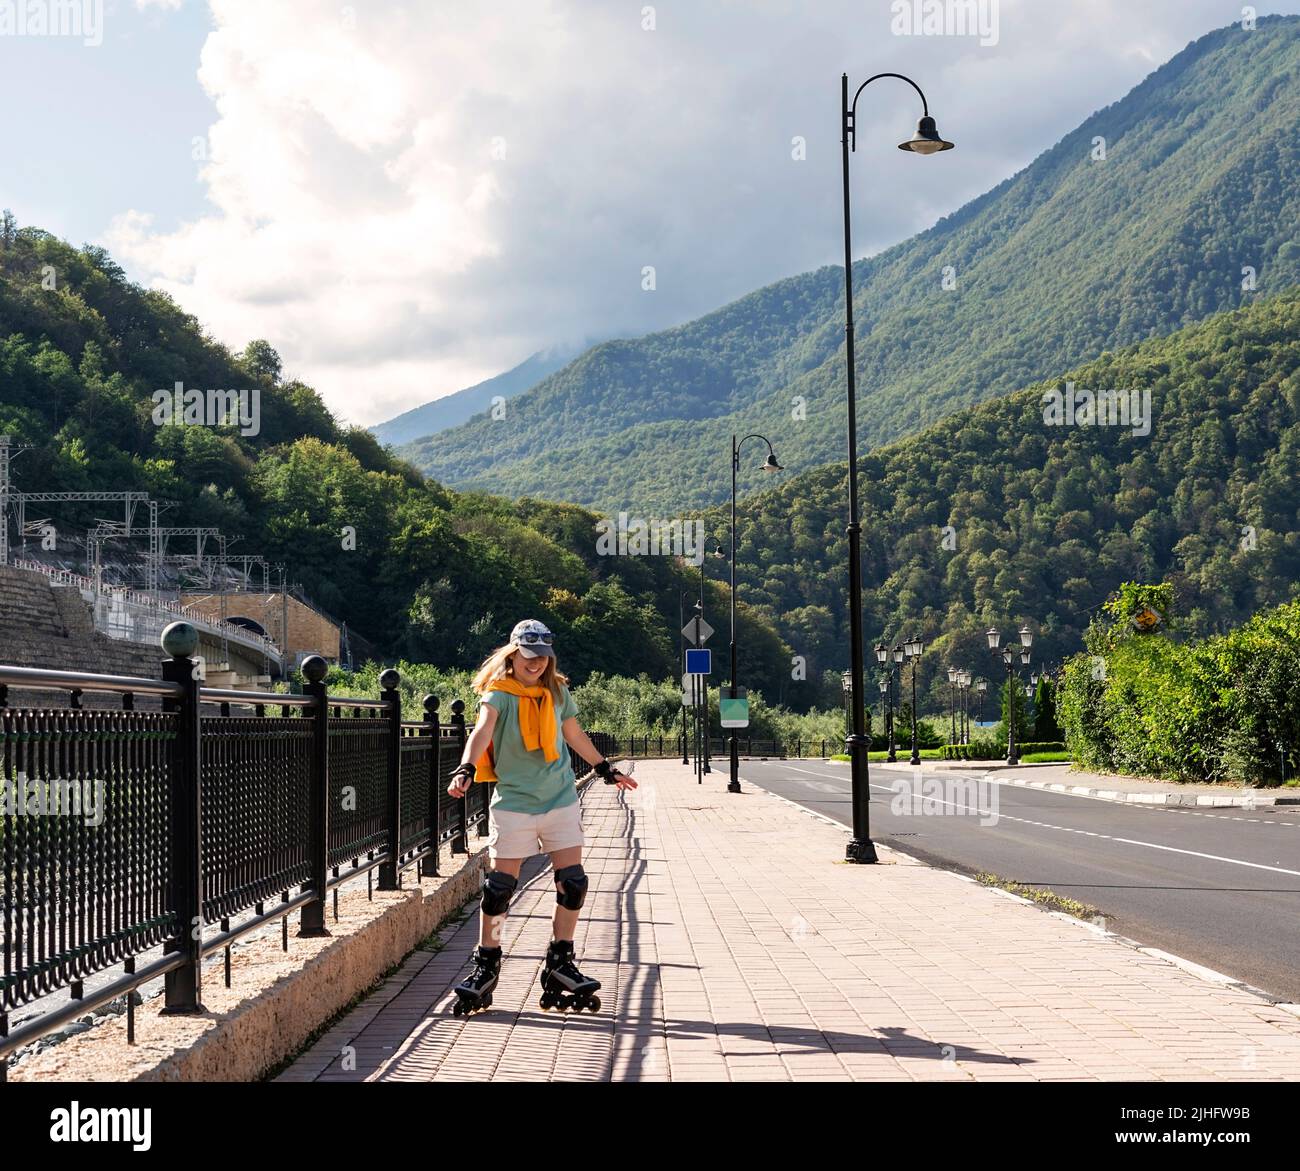 happy young woman in protective equipment riding on roller skates along embankment in summer active lifestyle, outdoor activities, roller skating Stock Photo